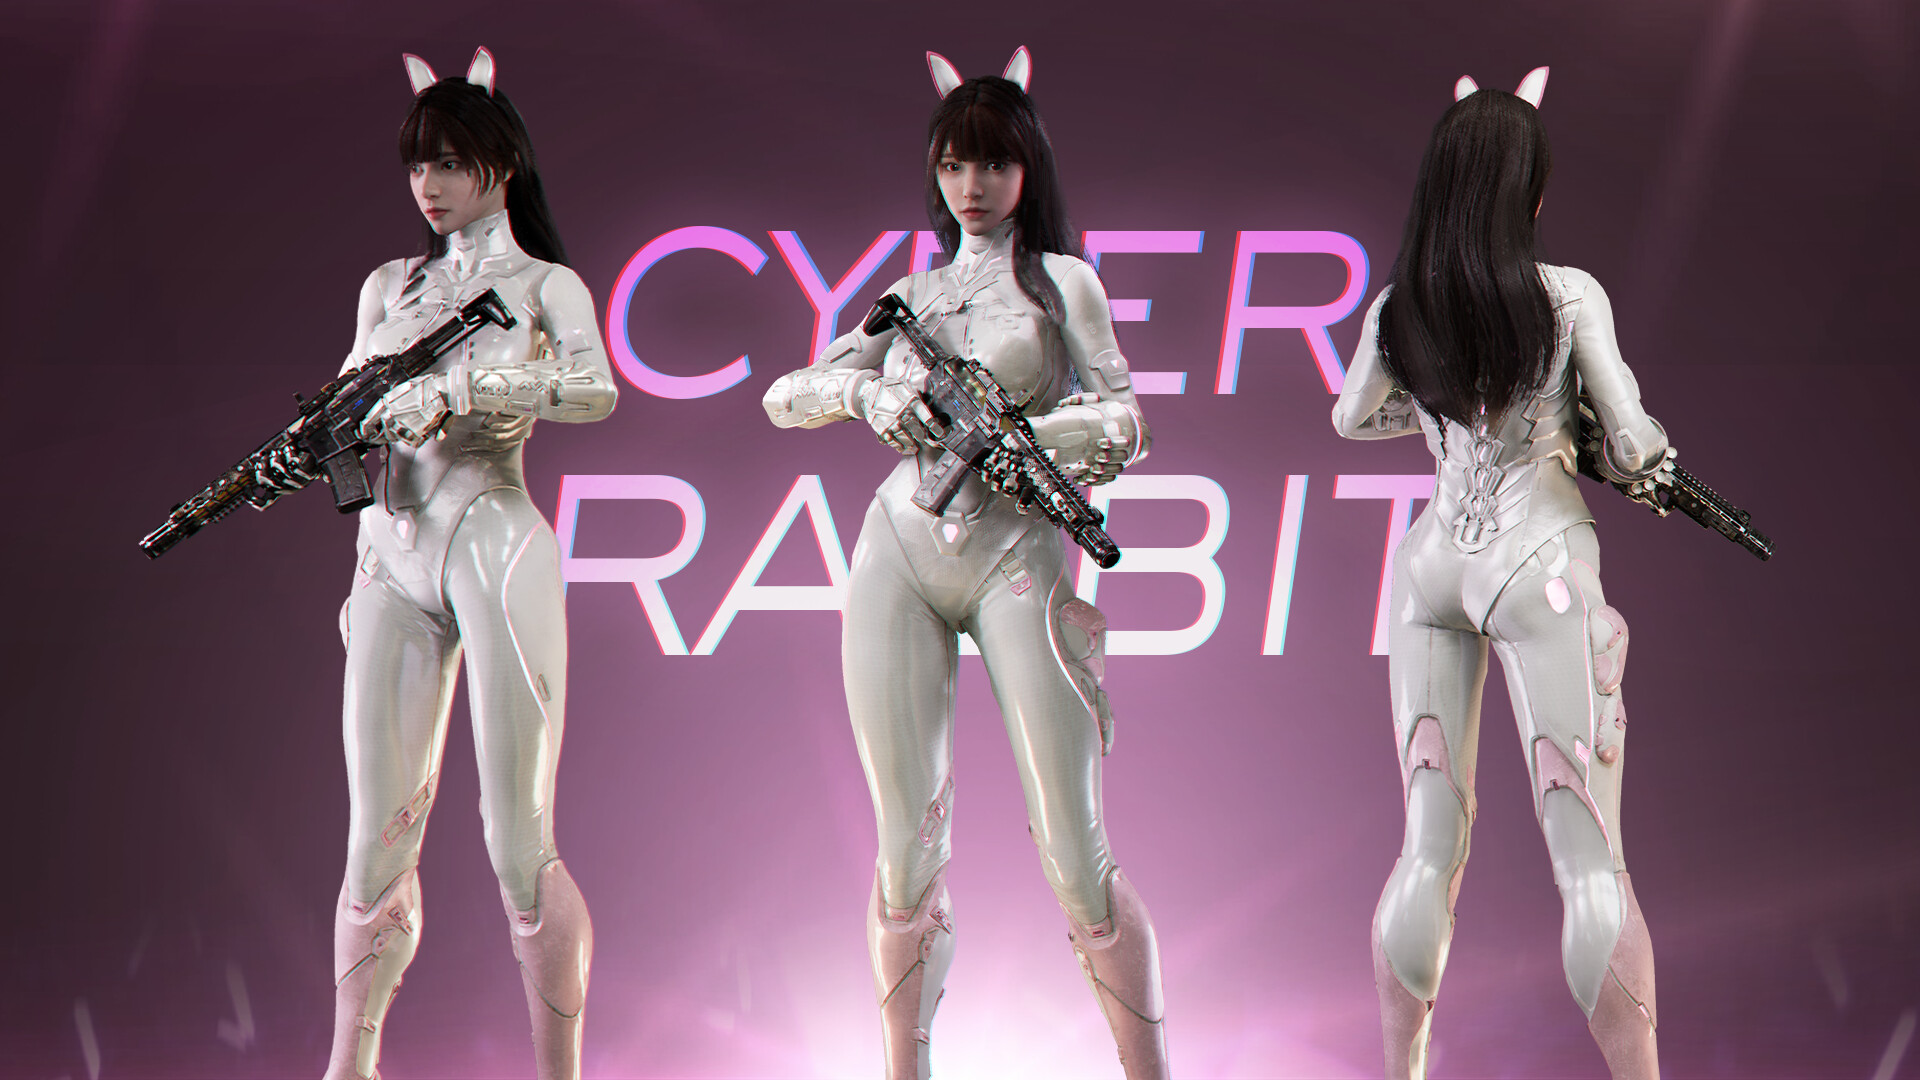 Bright Memory: Infinite Cyber Rabbit DLC Free Download for PC